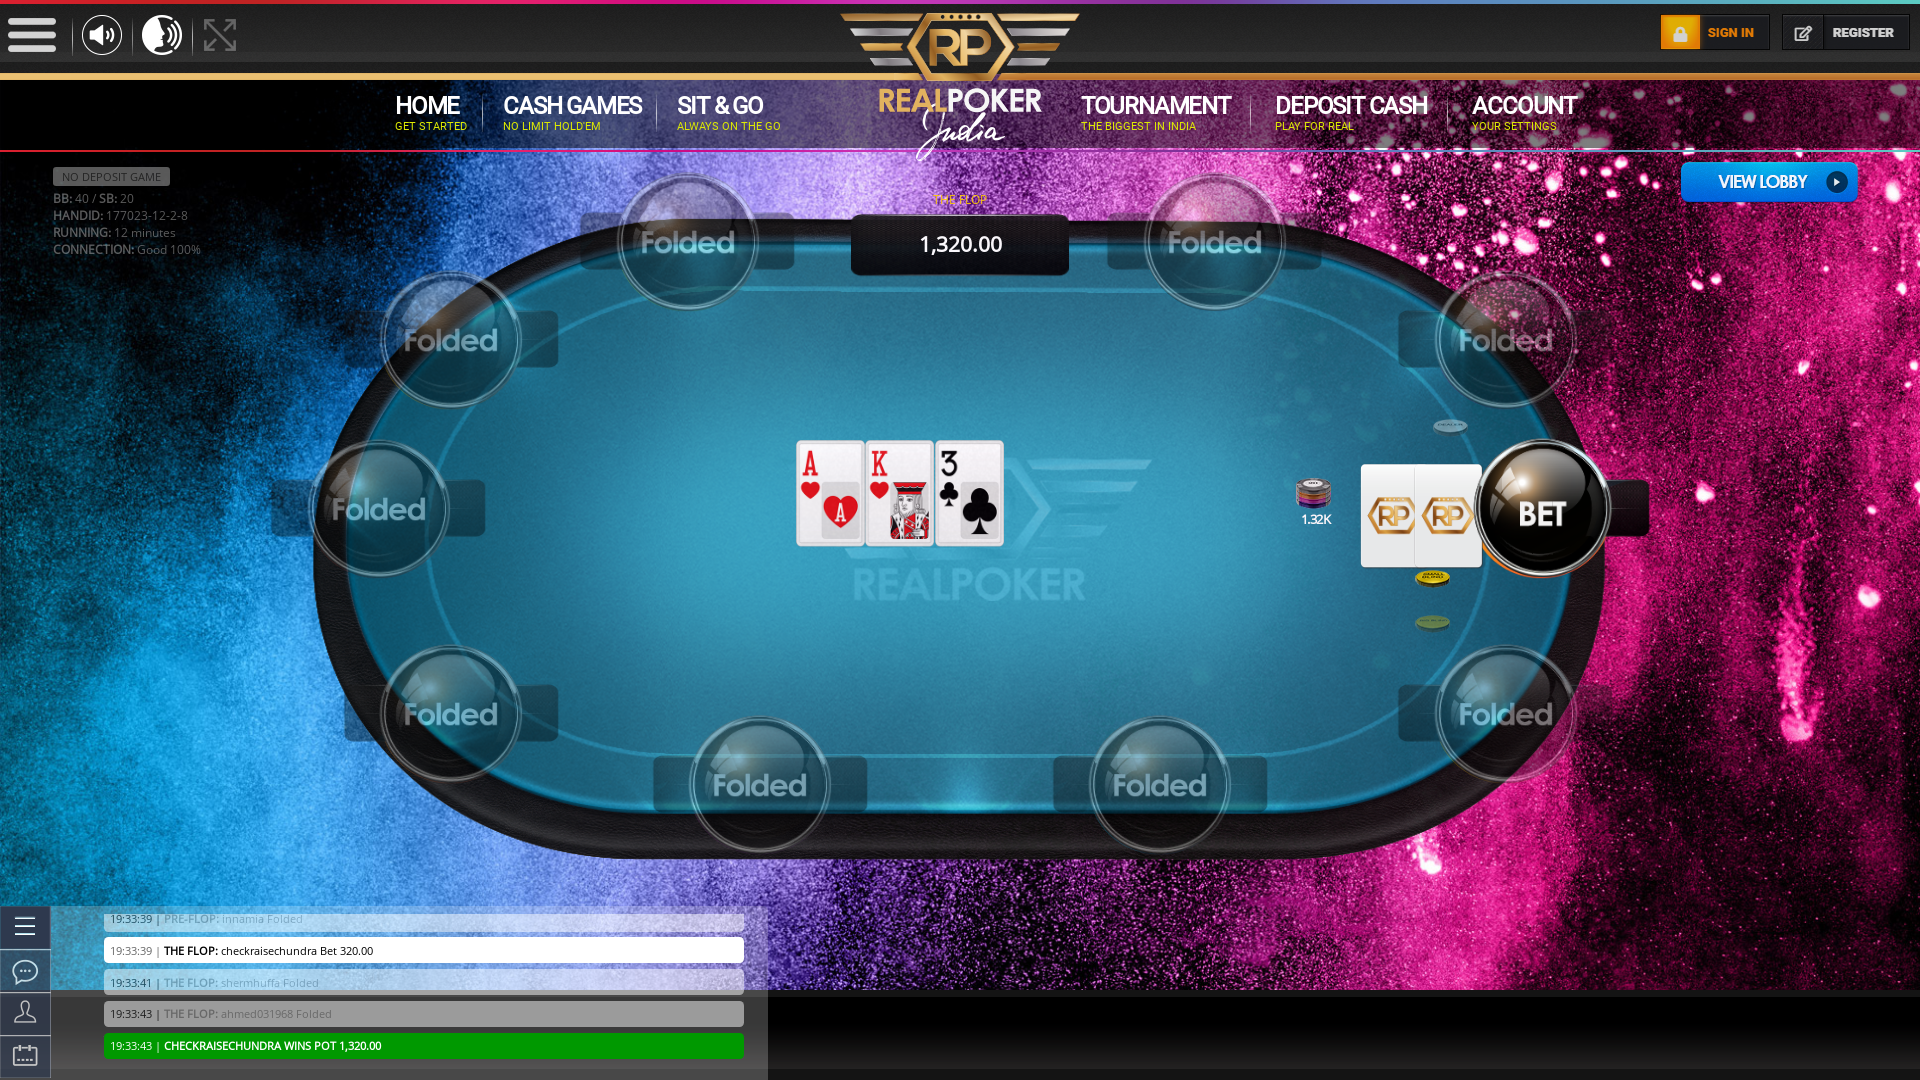 Indian online poker on a 10 player table in the 11th minute match up